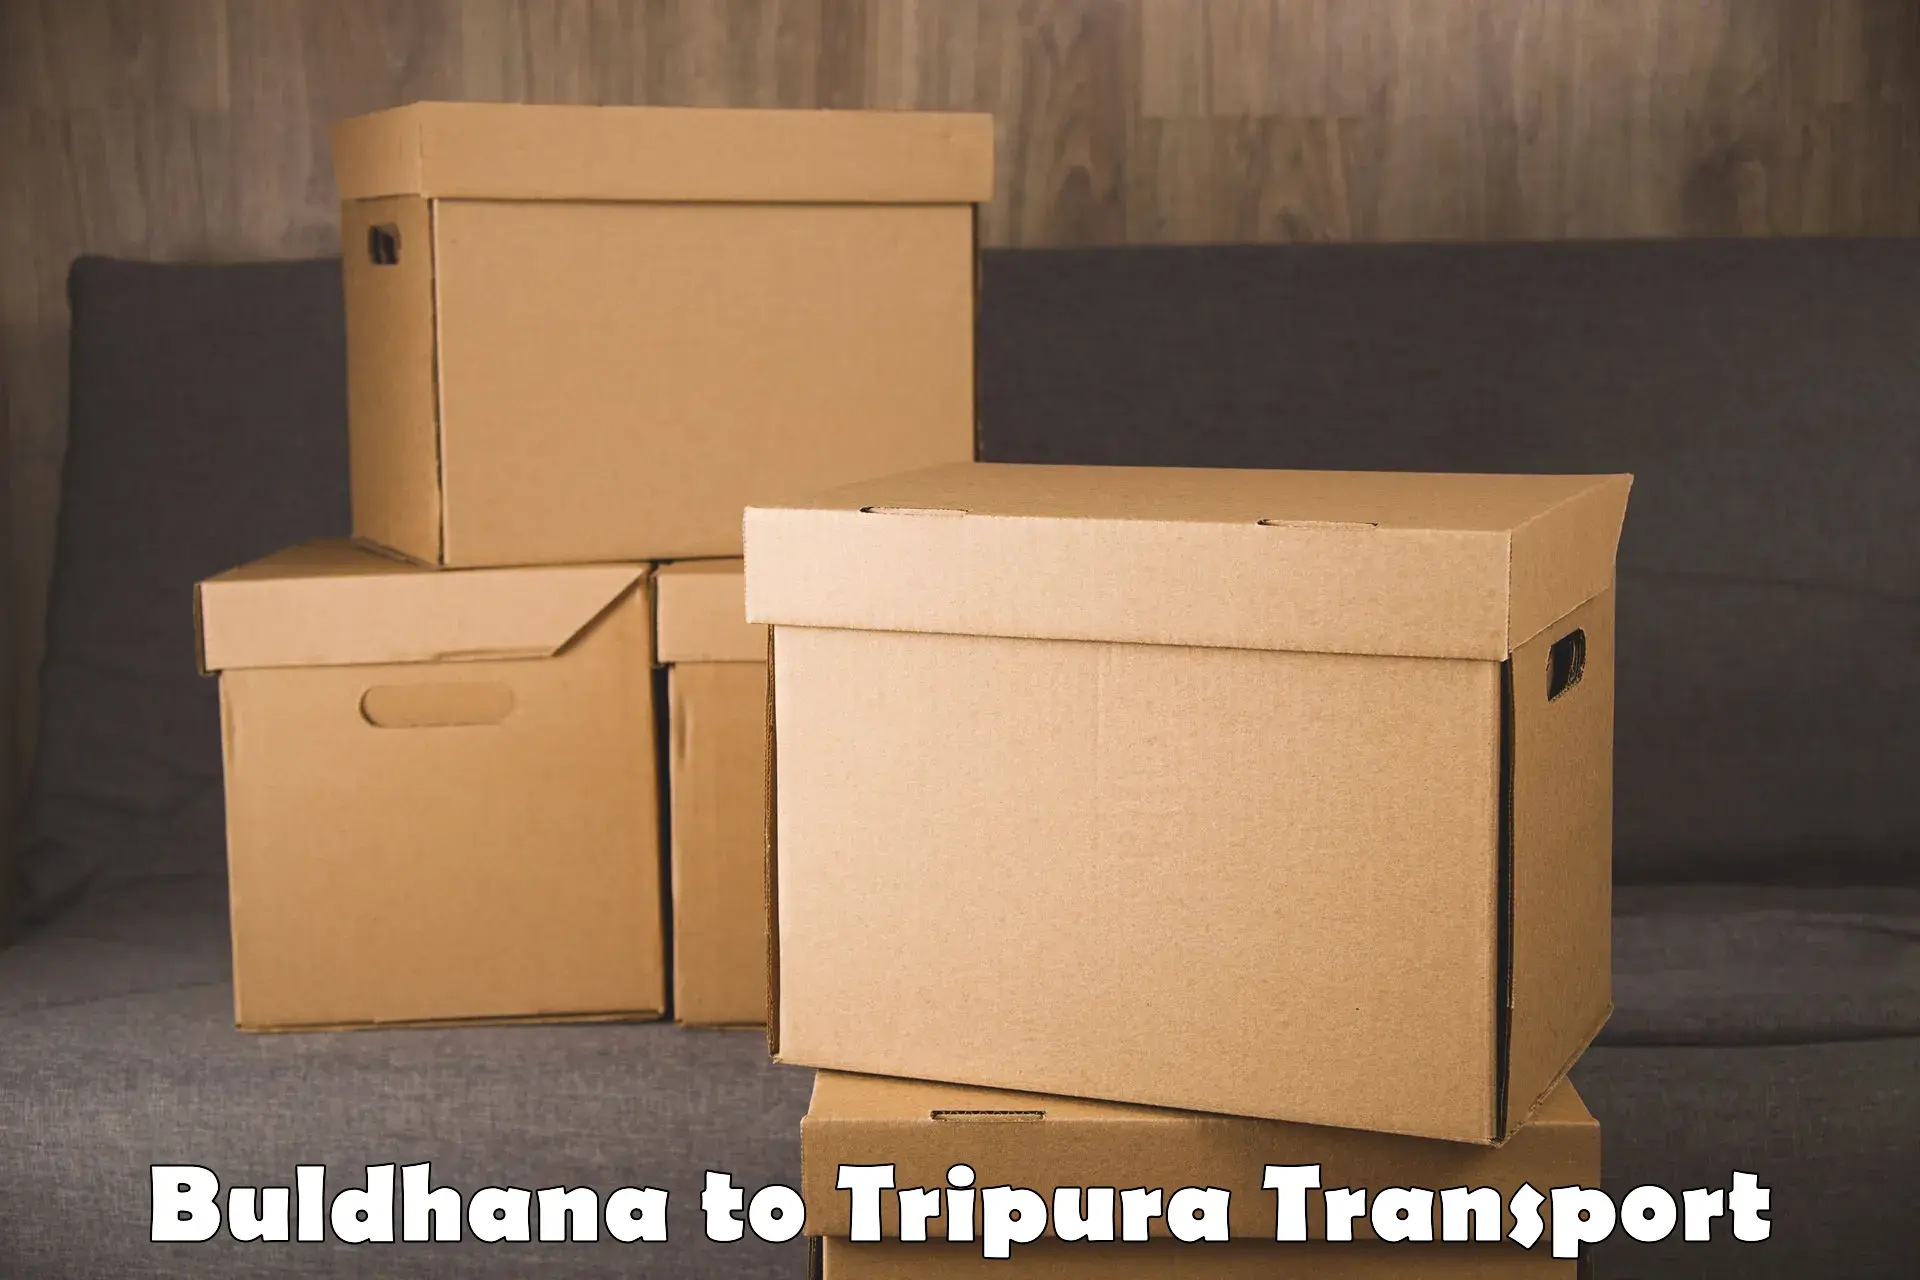 Container transport service Buldhana to Udaipur Tripura